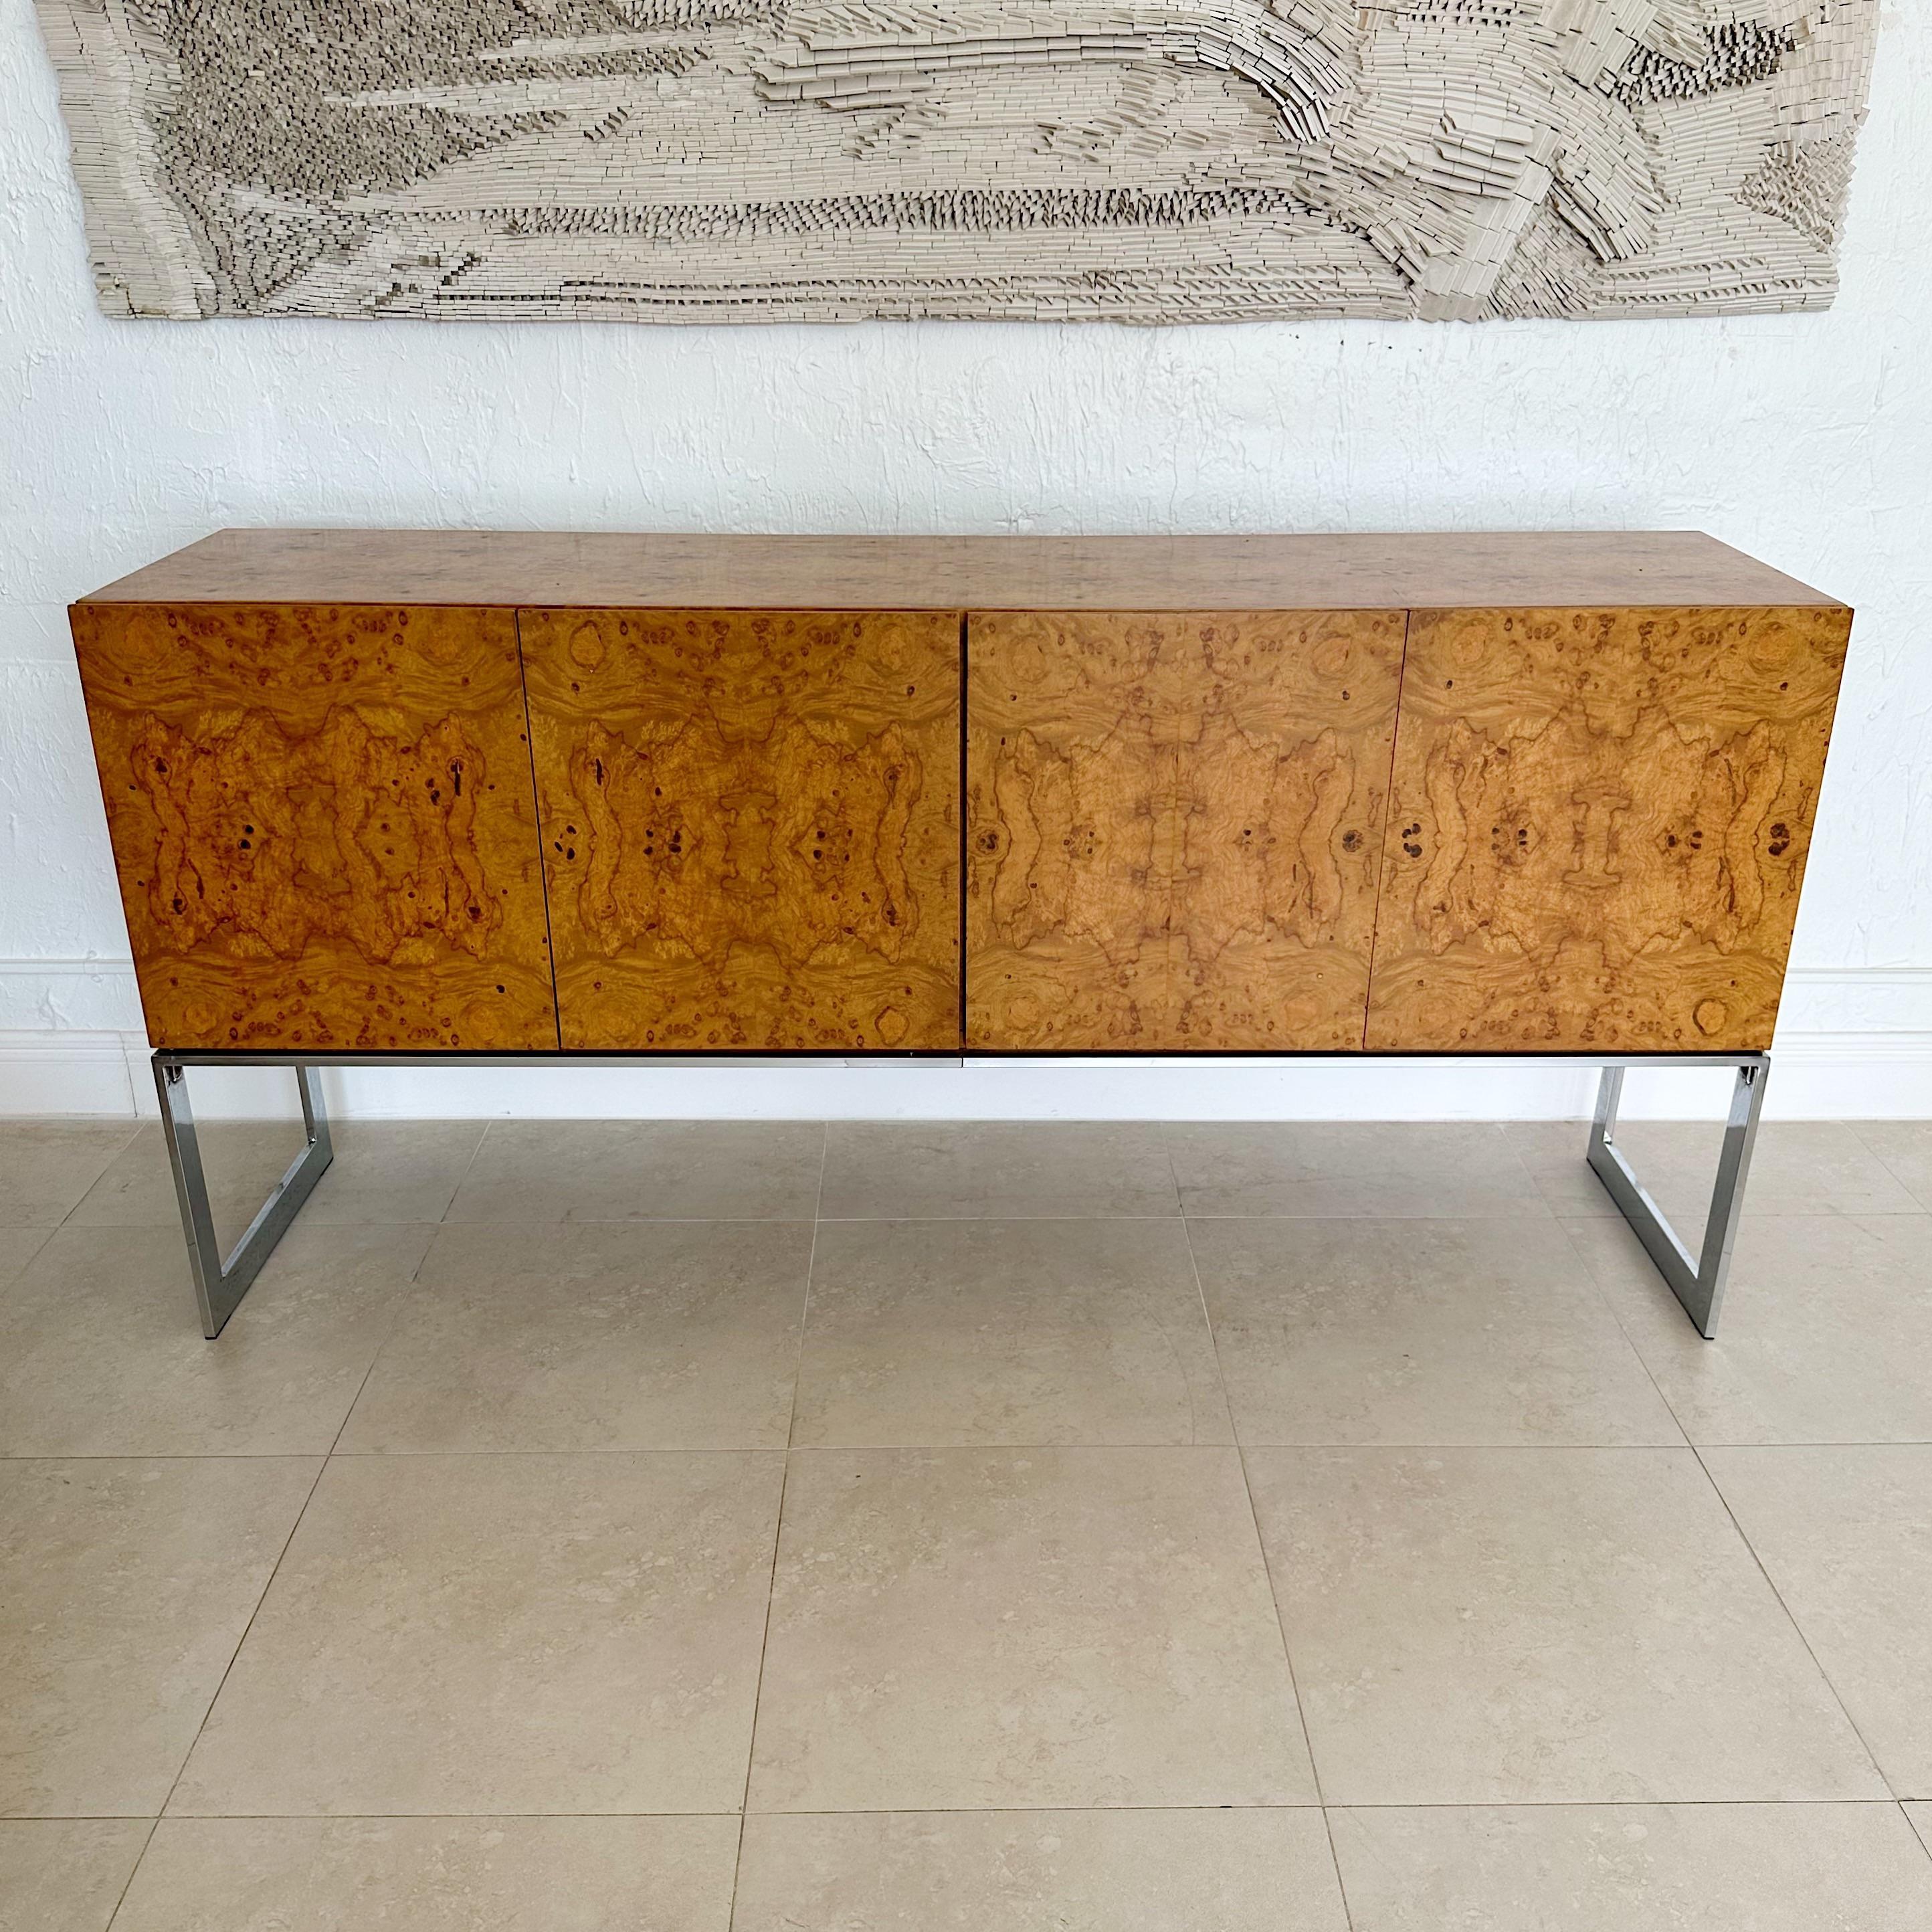 Milo Baughman designed for Thayer Cogging matched burl wood four door credenza, sideboard from the early 1970's. Interior on left side has one glass shelf and the right side has one interior drawer. Fully restored close to original condition,